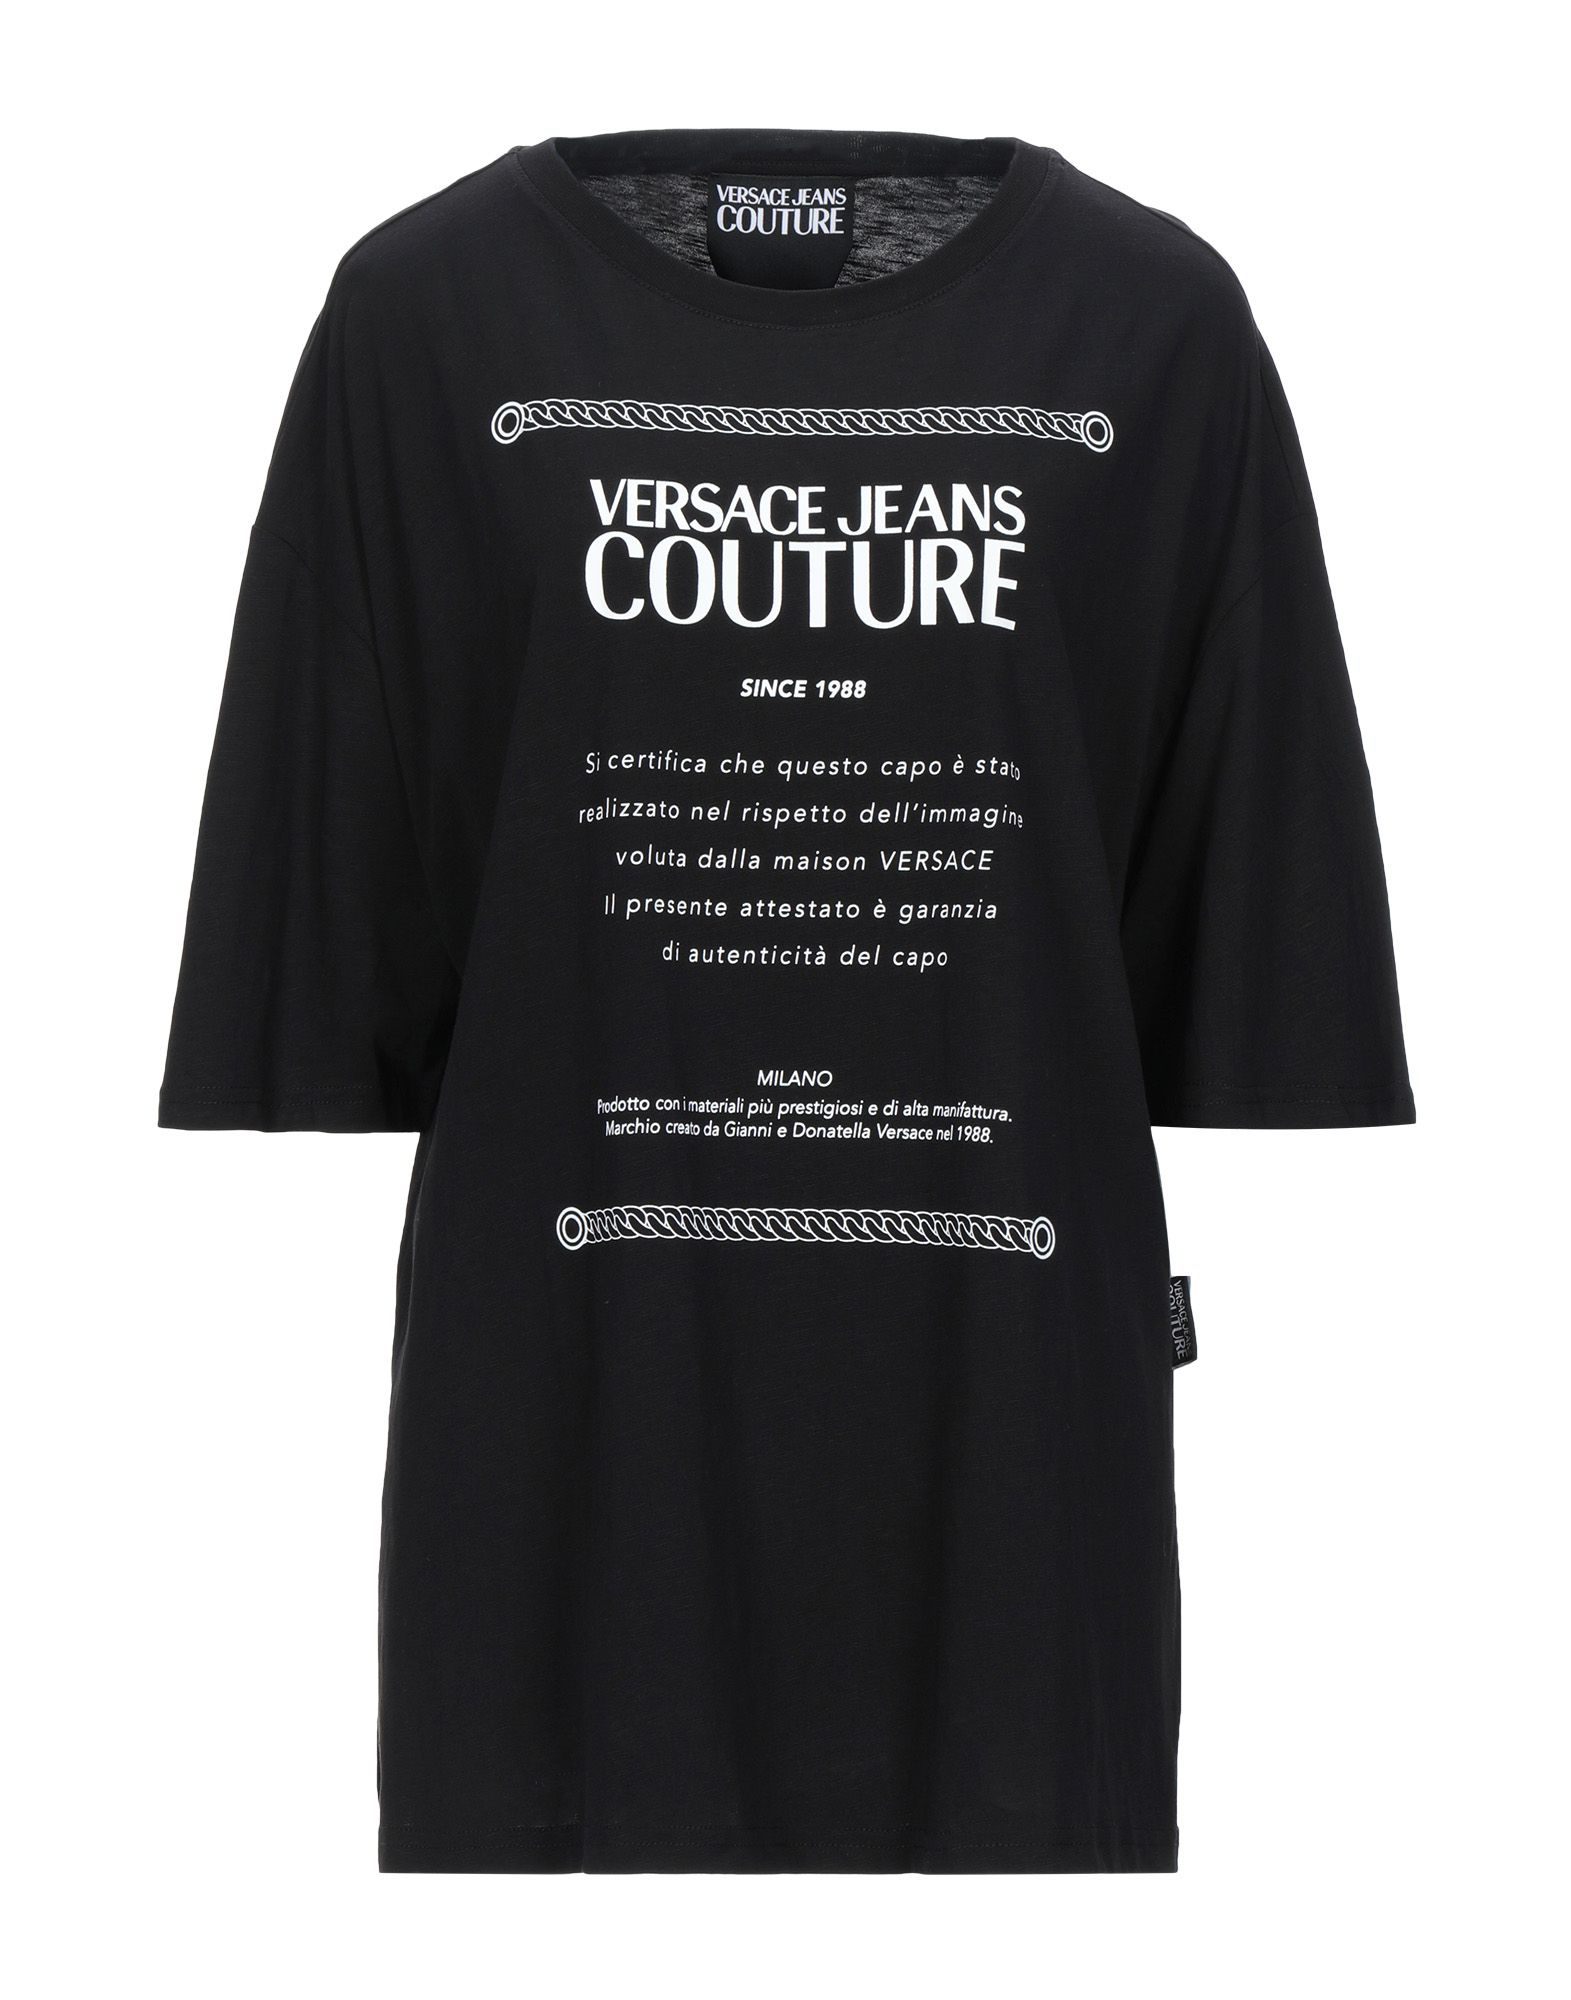 VERSACE JEANS COUTURE T-shirts - Item 12494869